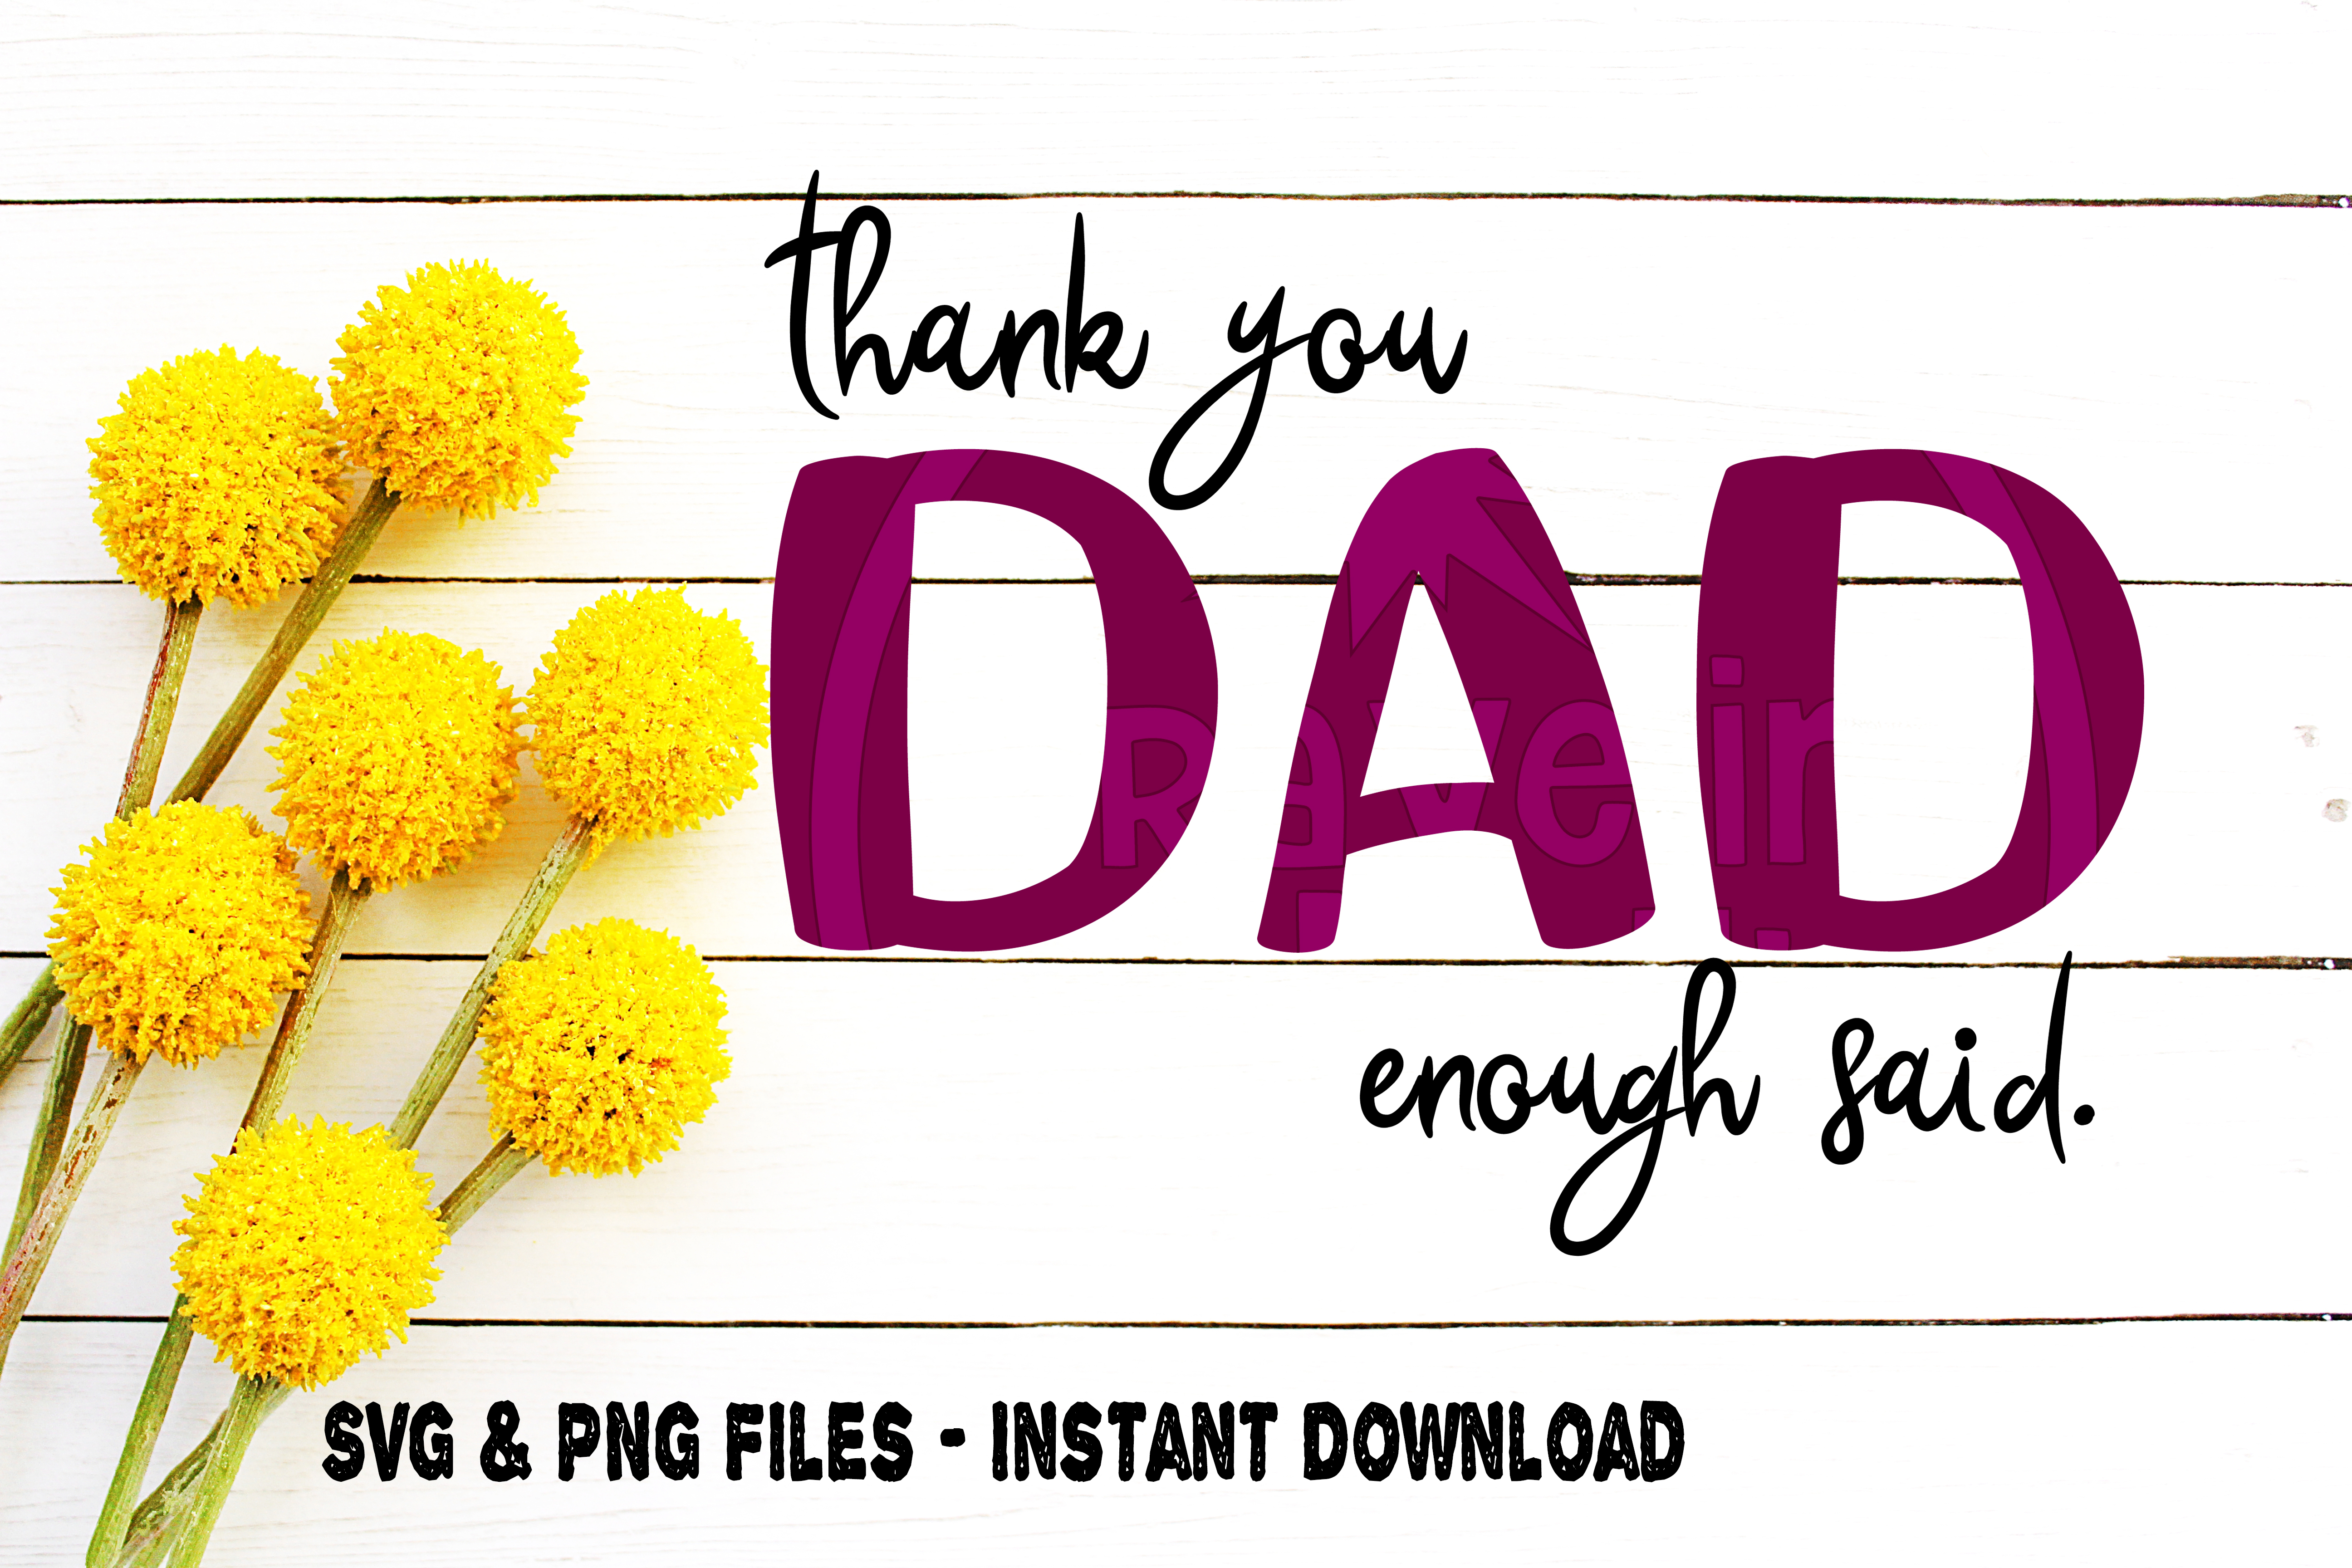 Download Dad svg, Father's day svg, thank you dad svg, Gift Idea for Dad, Simple Dad svg, Card Template ...